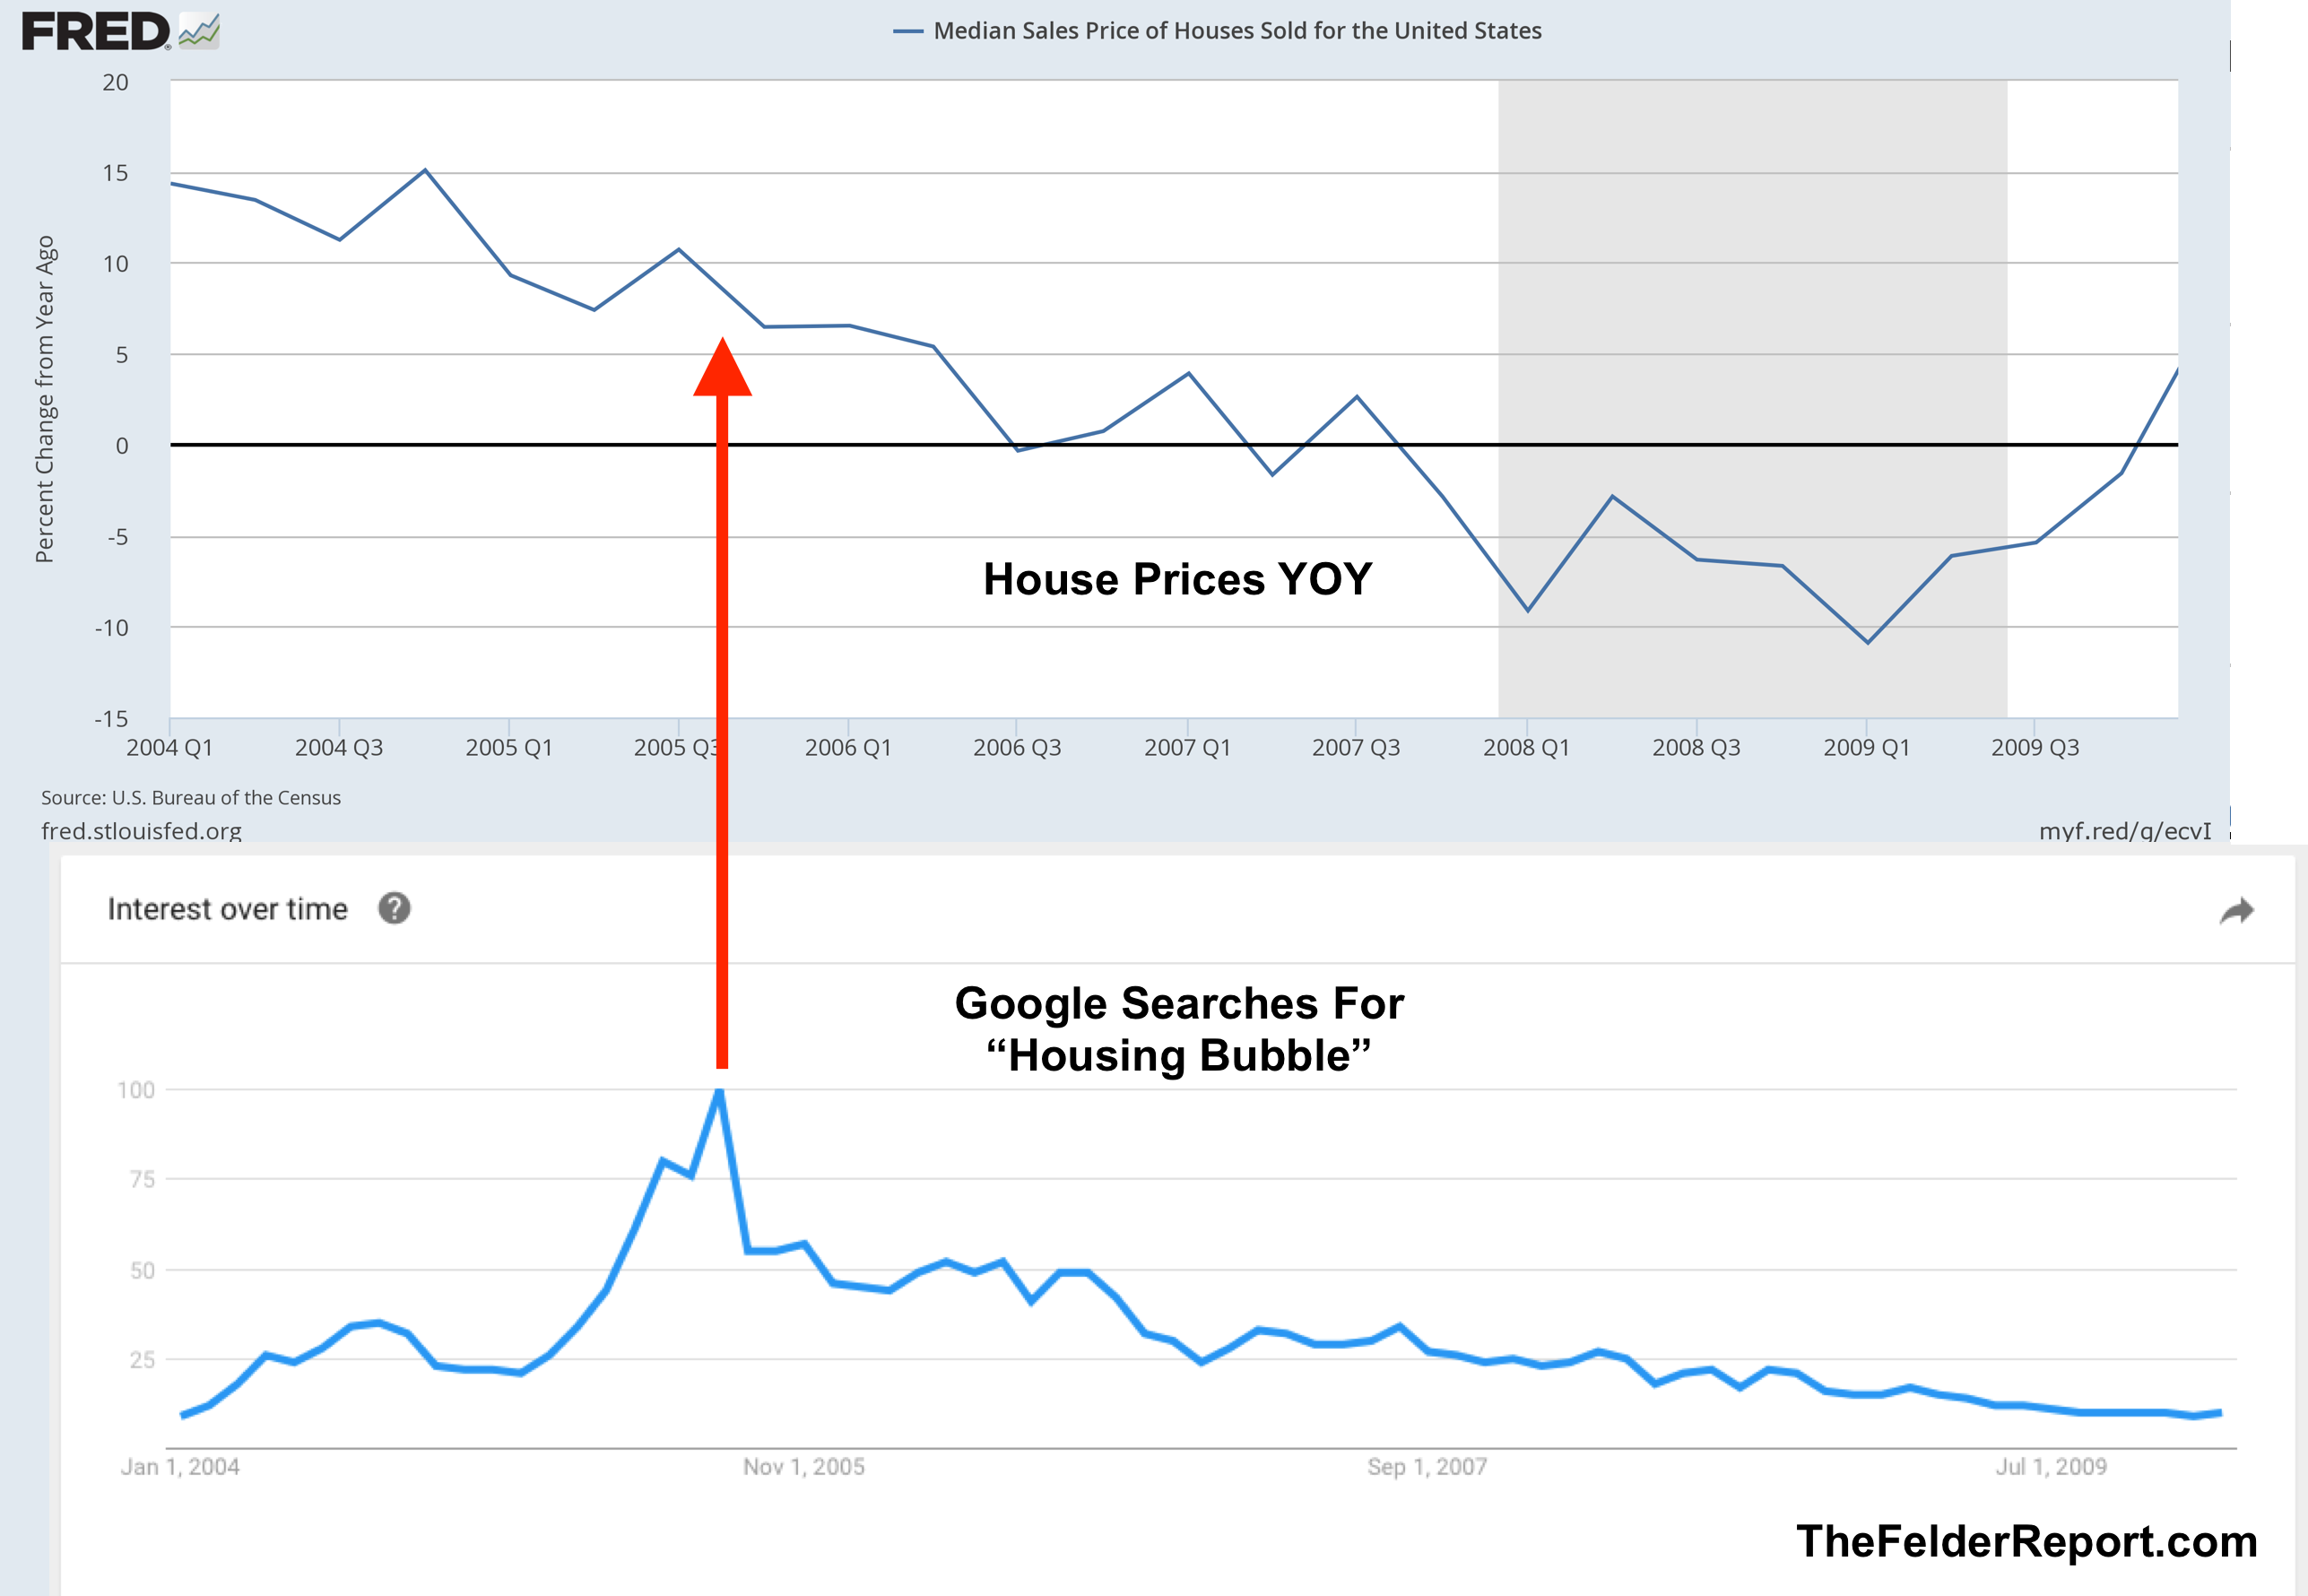 House Prices YoY vs Google Searches For Housing Bubble 2004-2009